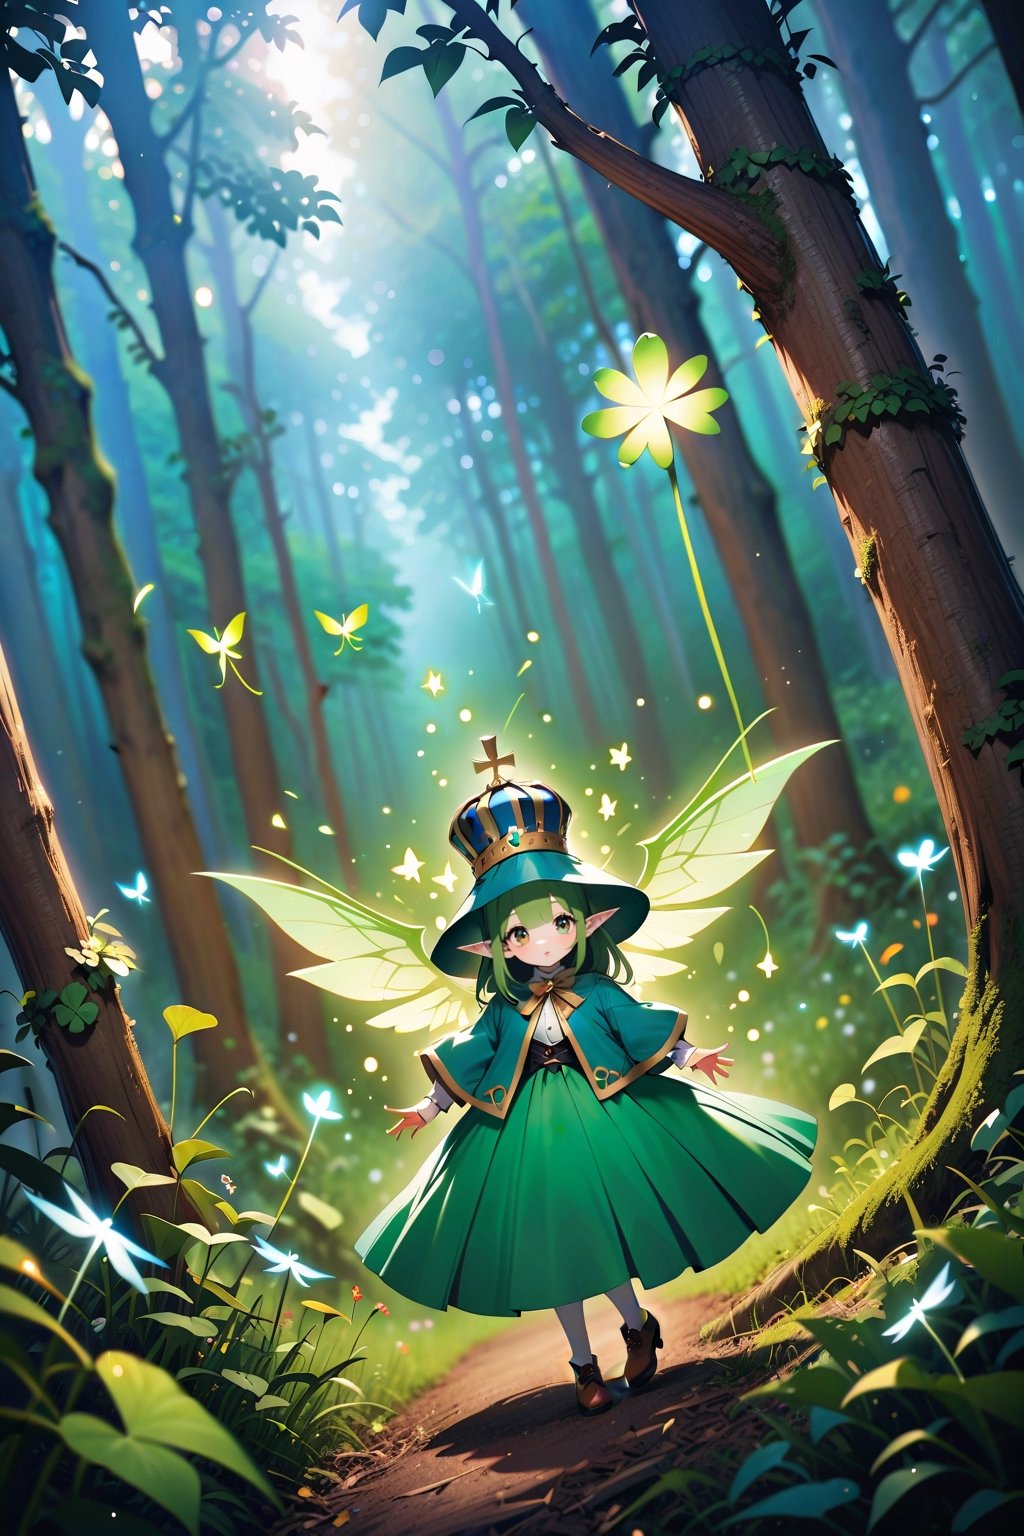 The noble wizard of Oz, dressed in clothes decorated with four-leaf clover and wearing a crown made of four-leaf clover, has beautiful green elf wings and flies and shuttles in the magical forest.